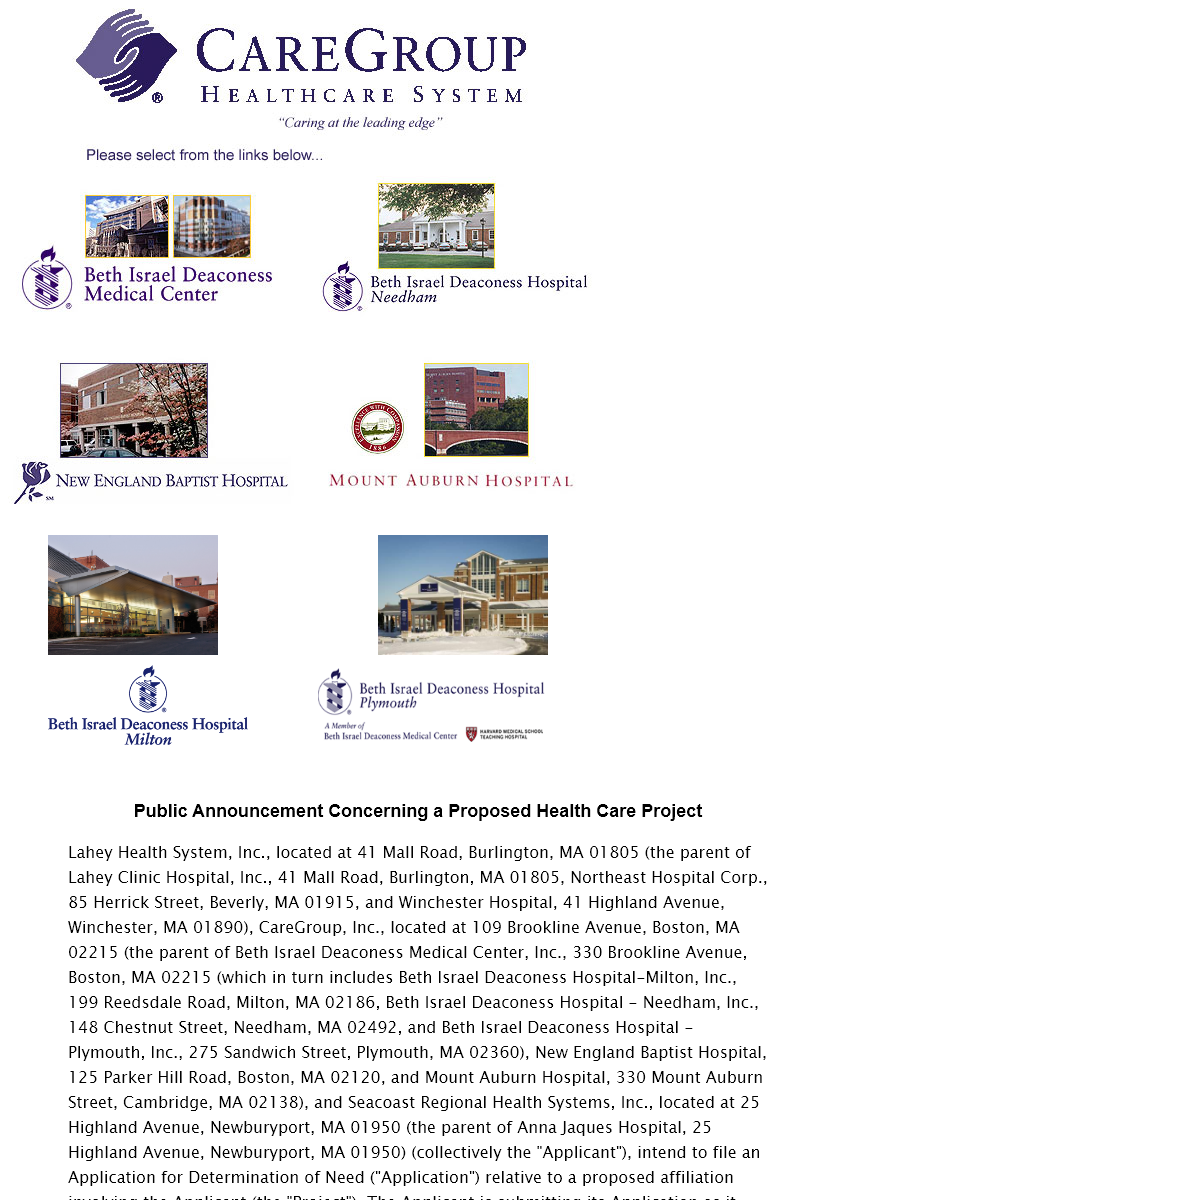 A complete backup of caregroup.org